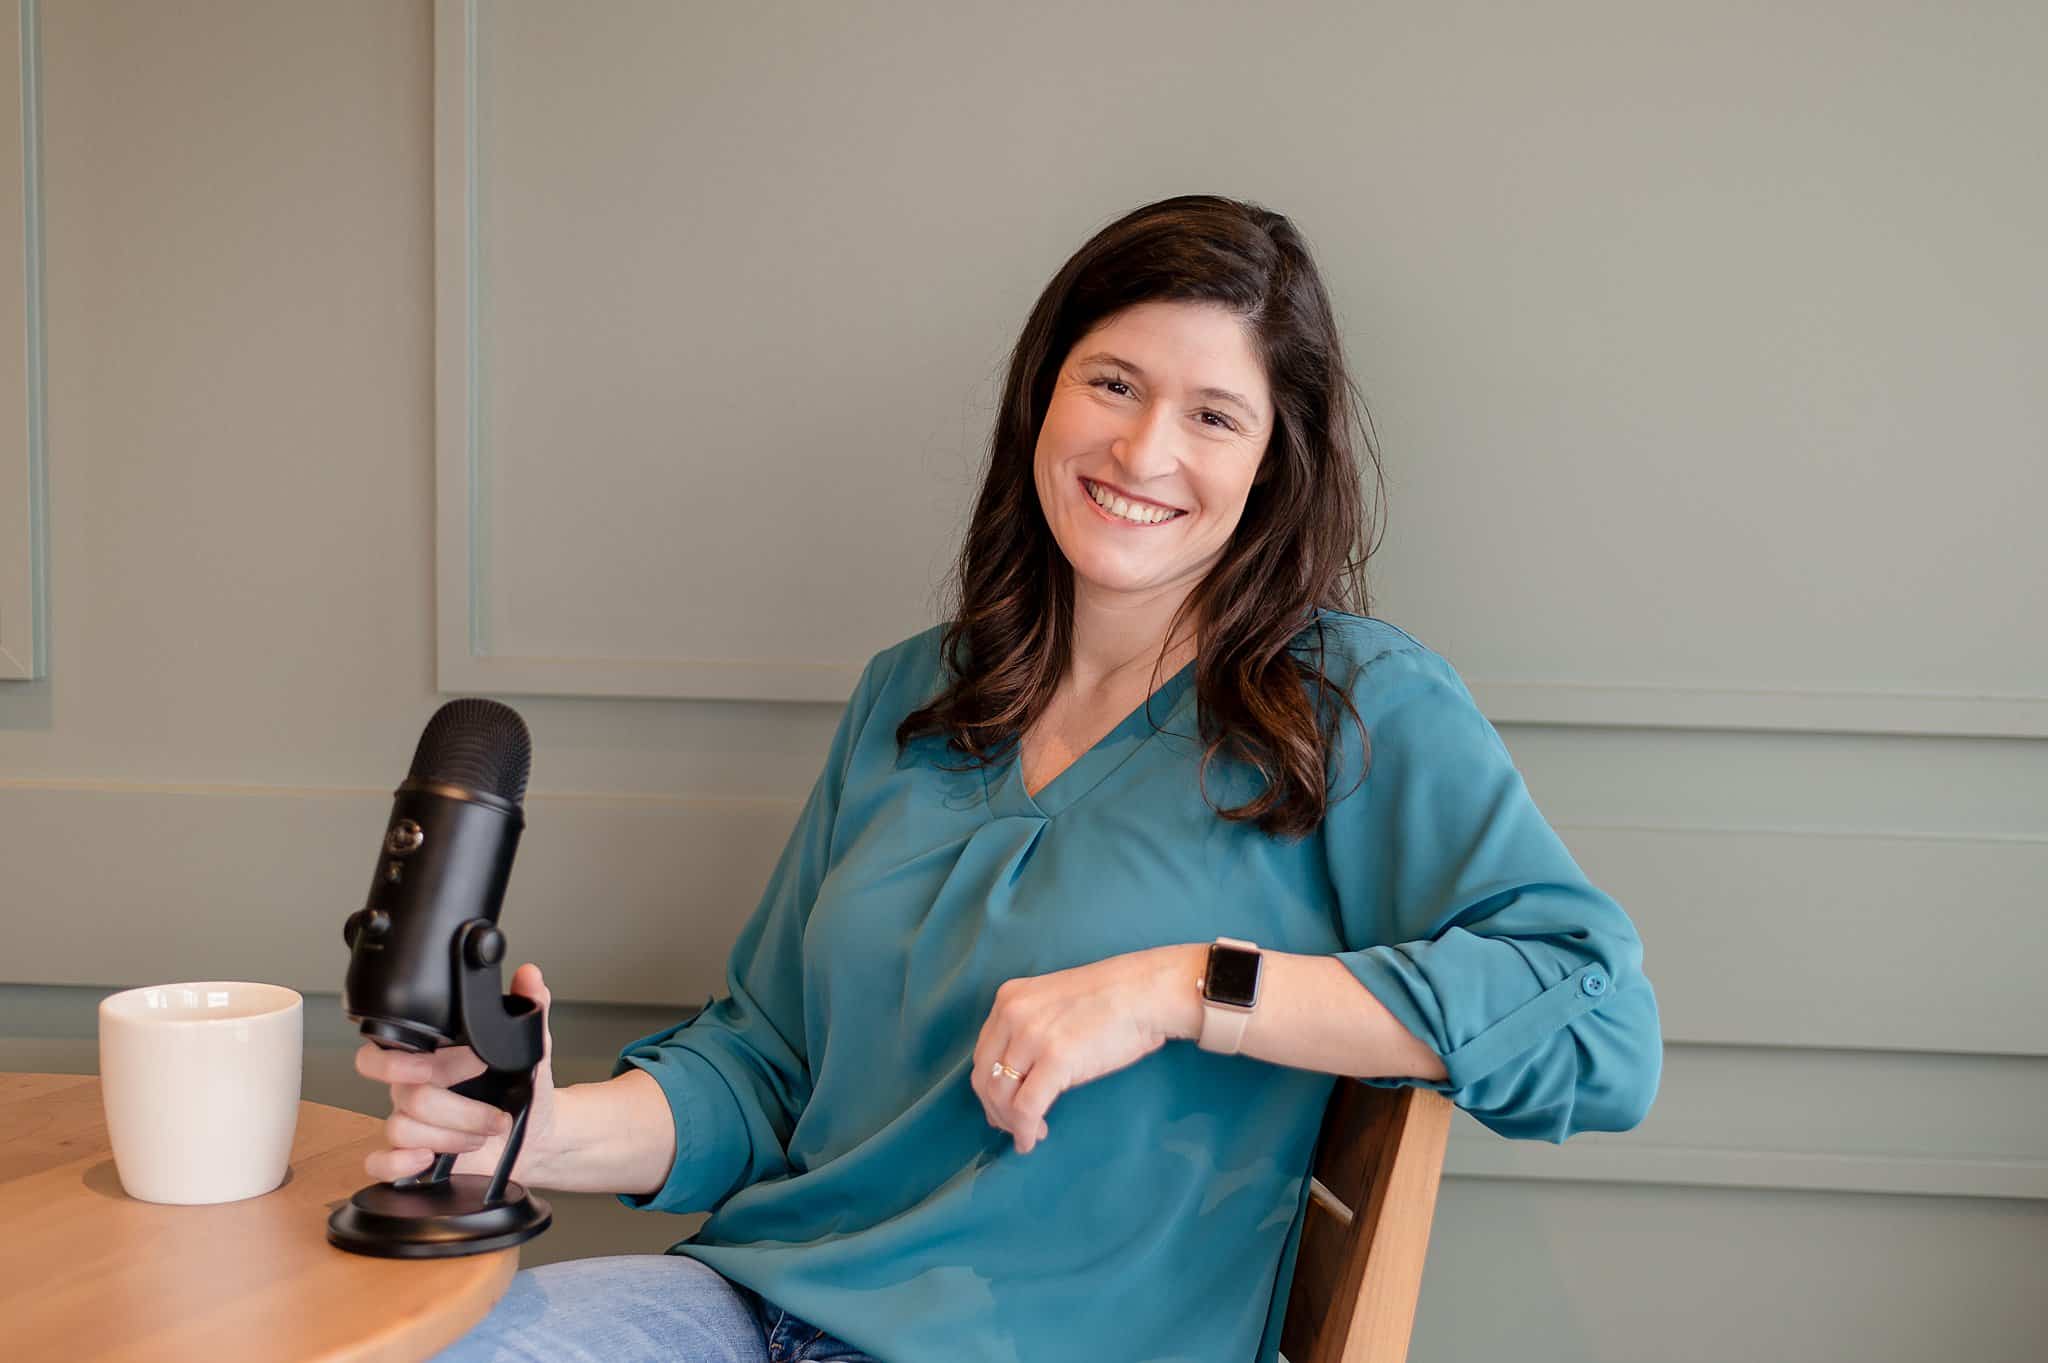 Lori Pickens, woman in a green top sitting in a chair smiling with a podcast microphone, and a mug of coffee